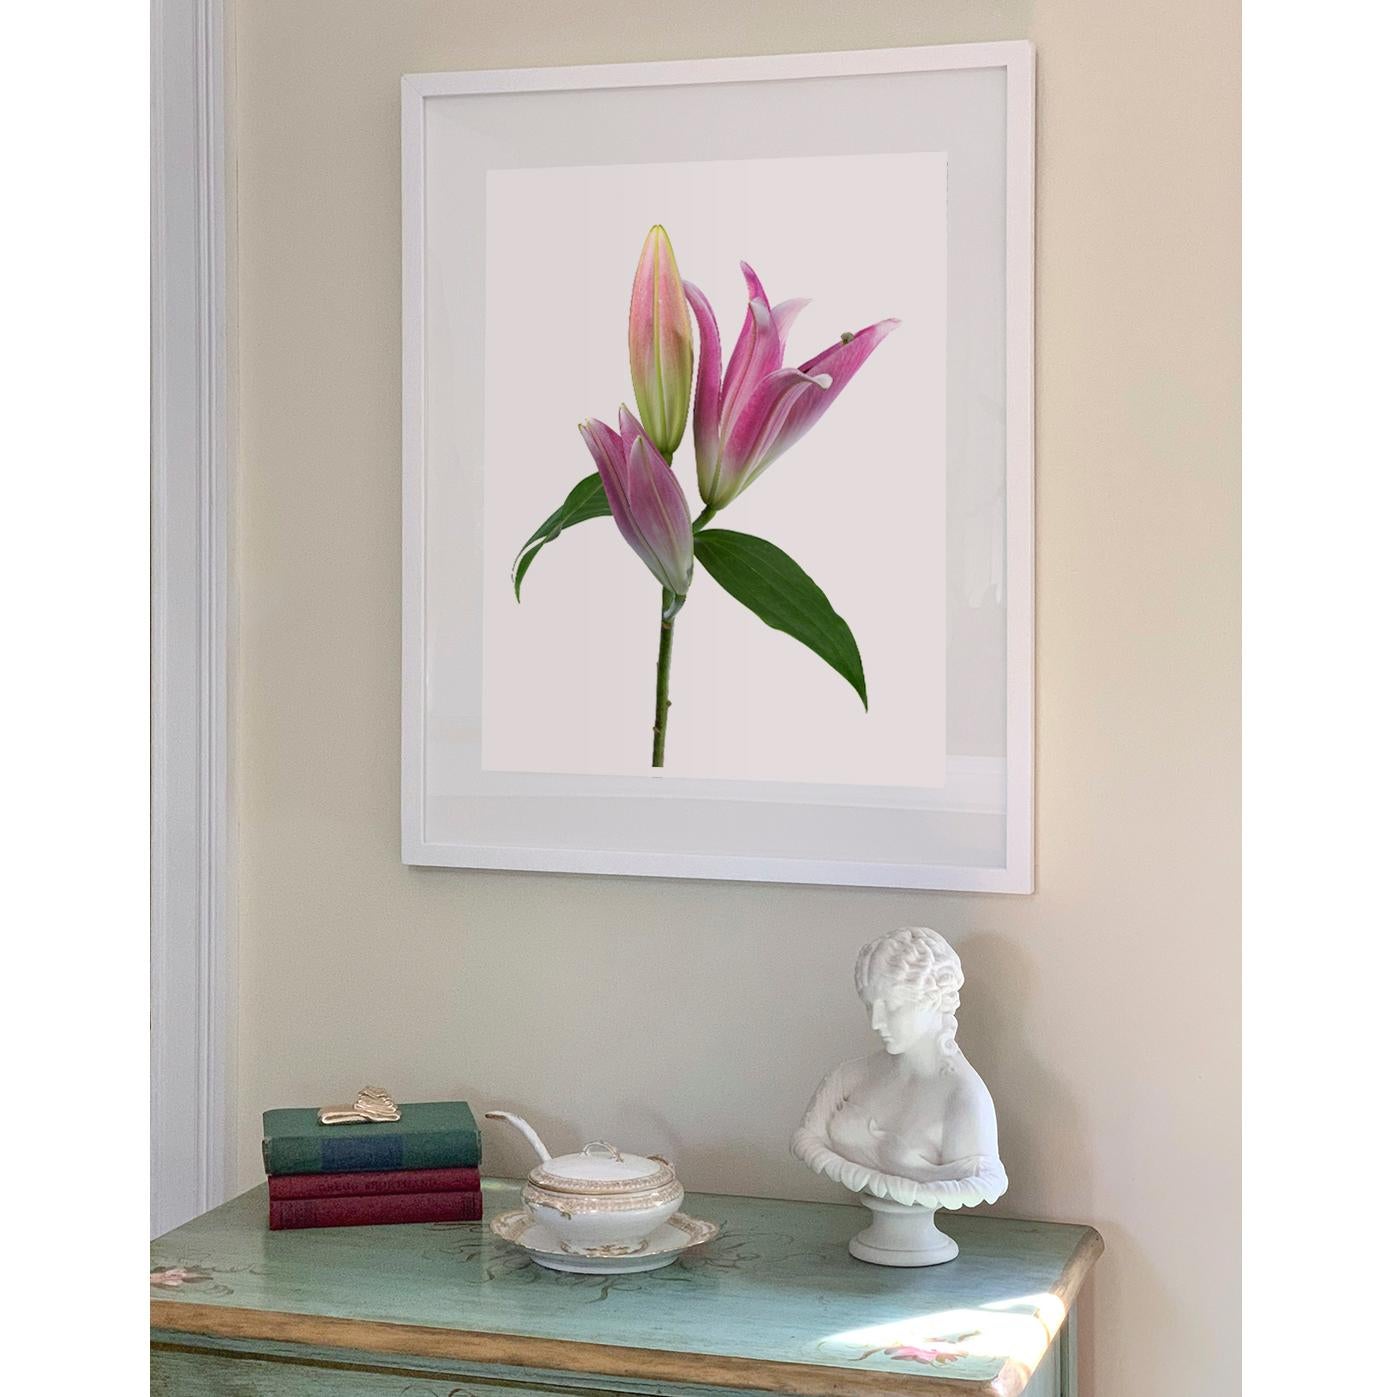 Lily 181 B, Color Photograph, Limited Edition, Pink, Framed, Botanical, Floral For Sale 5